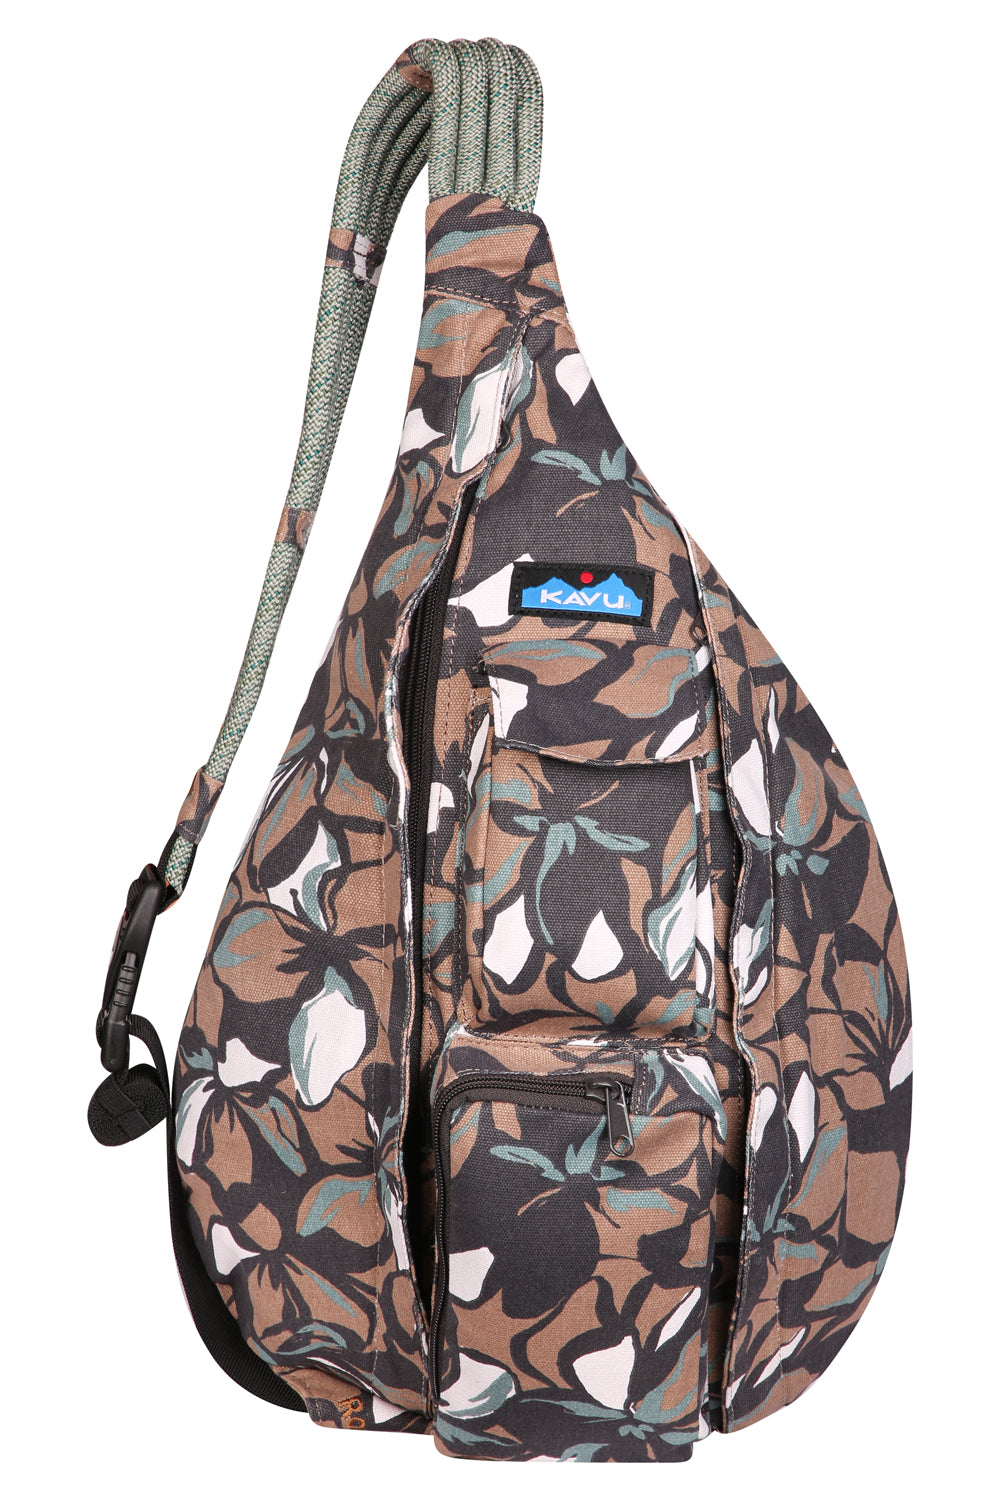 Rope Bags, Rope Sling Bags, Handbags, Crossbody Bags, and Totes by Kavu at  P. C. Fallon Co.